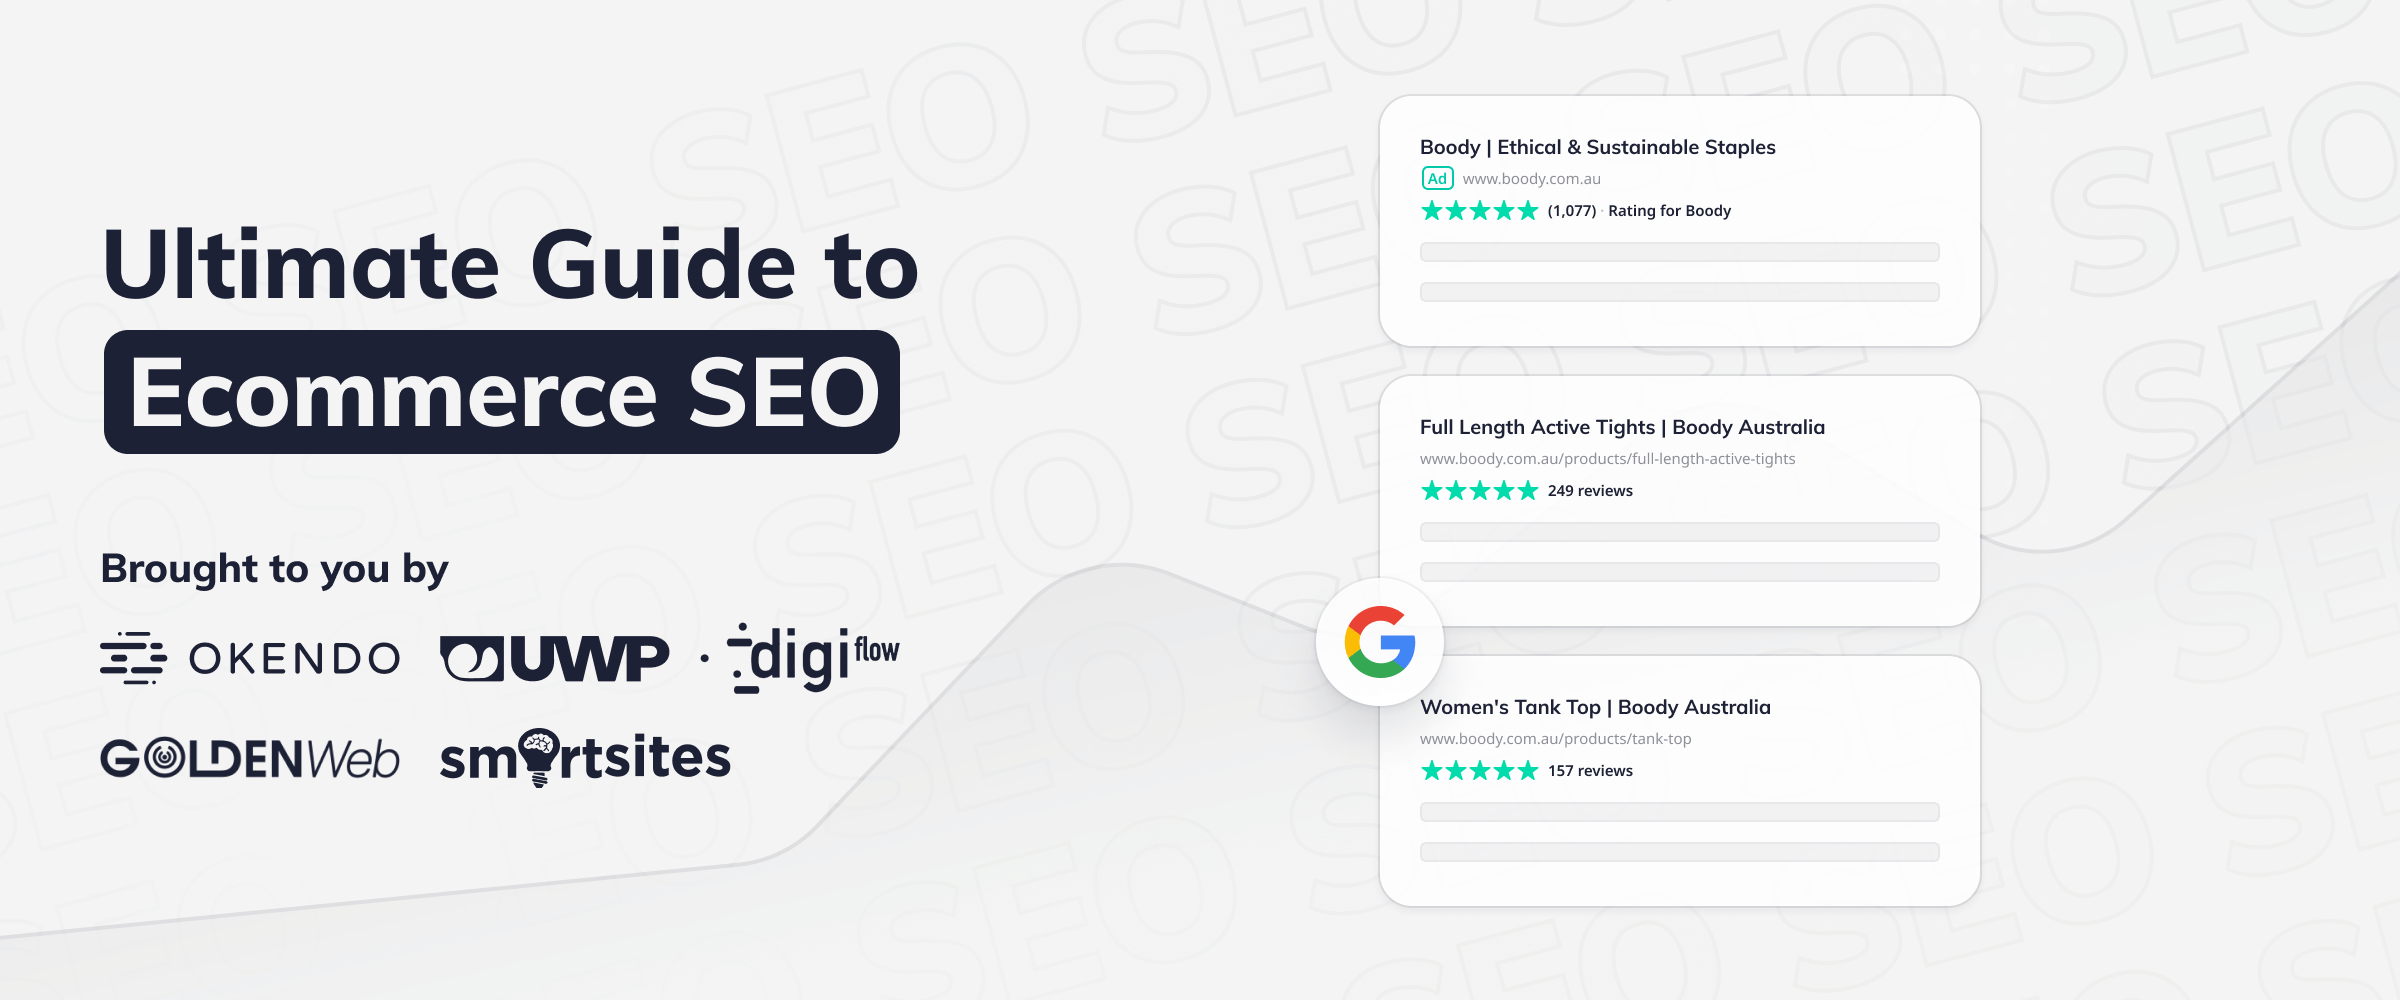 The Ultimate Guide to Ecommerce SEO